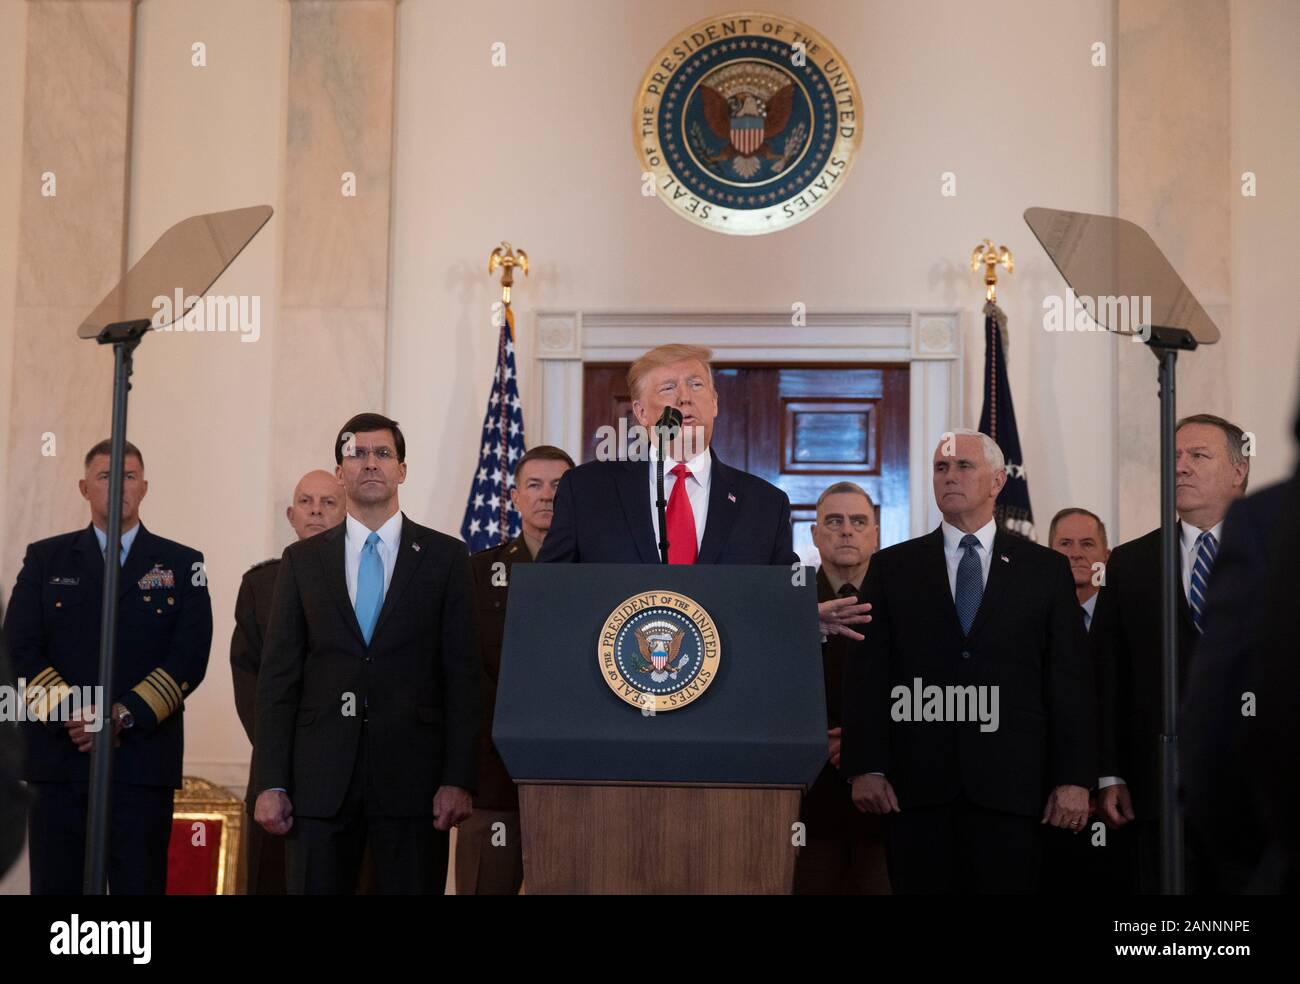 United States President Donald J. Trump delivers remarks on the Iraqi-Iranian situation in the Grand Foyer at the White House in Washington, DC on Wednesday, January 8, 2020. Trump responded to the Iranian missile attacks on U.S.-Iraqi airbases in Iraq. Identifiable behind the President from left to right: US Secretary of Defense Dr. Mark T. Esper, US Vice President Mike Pence, US Army General Mark A. Milley, Chairman of the Joint Chiefs of Staff, US Vice President Mike Pence, and US Secretary of State Mike Pompeo.Credit: Tasos Katopodis/Pool via CNP | usage worldwide Stock Photo